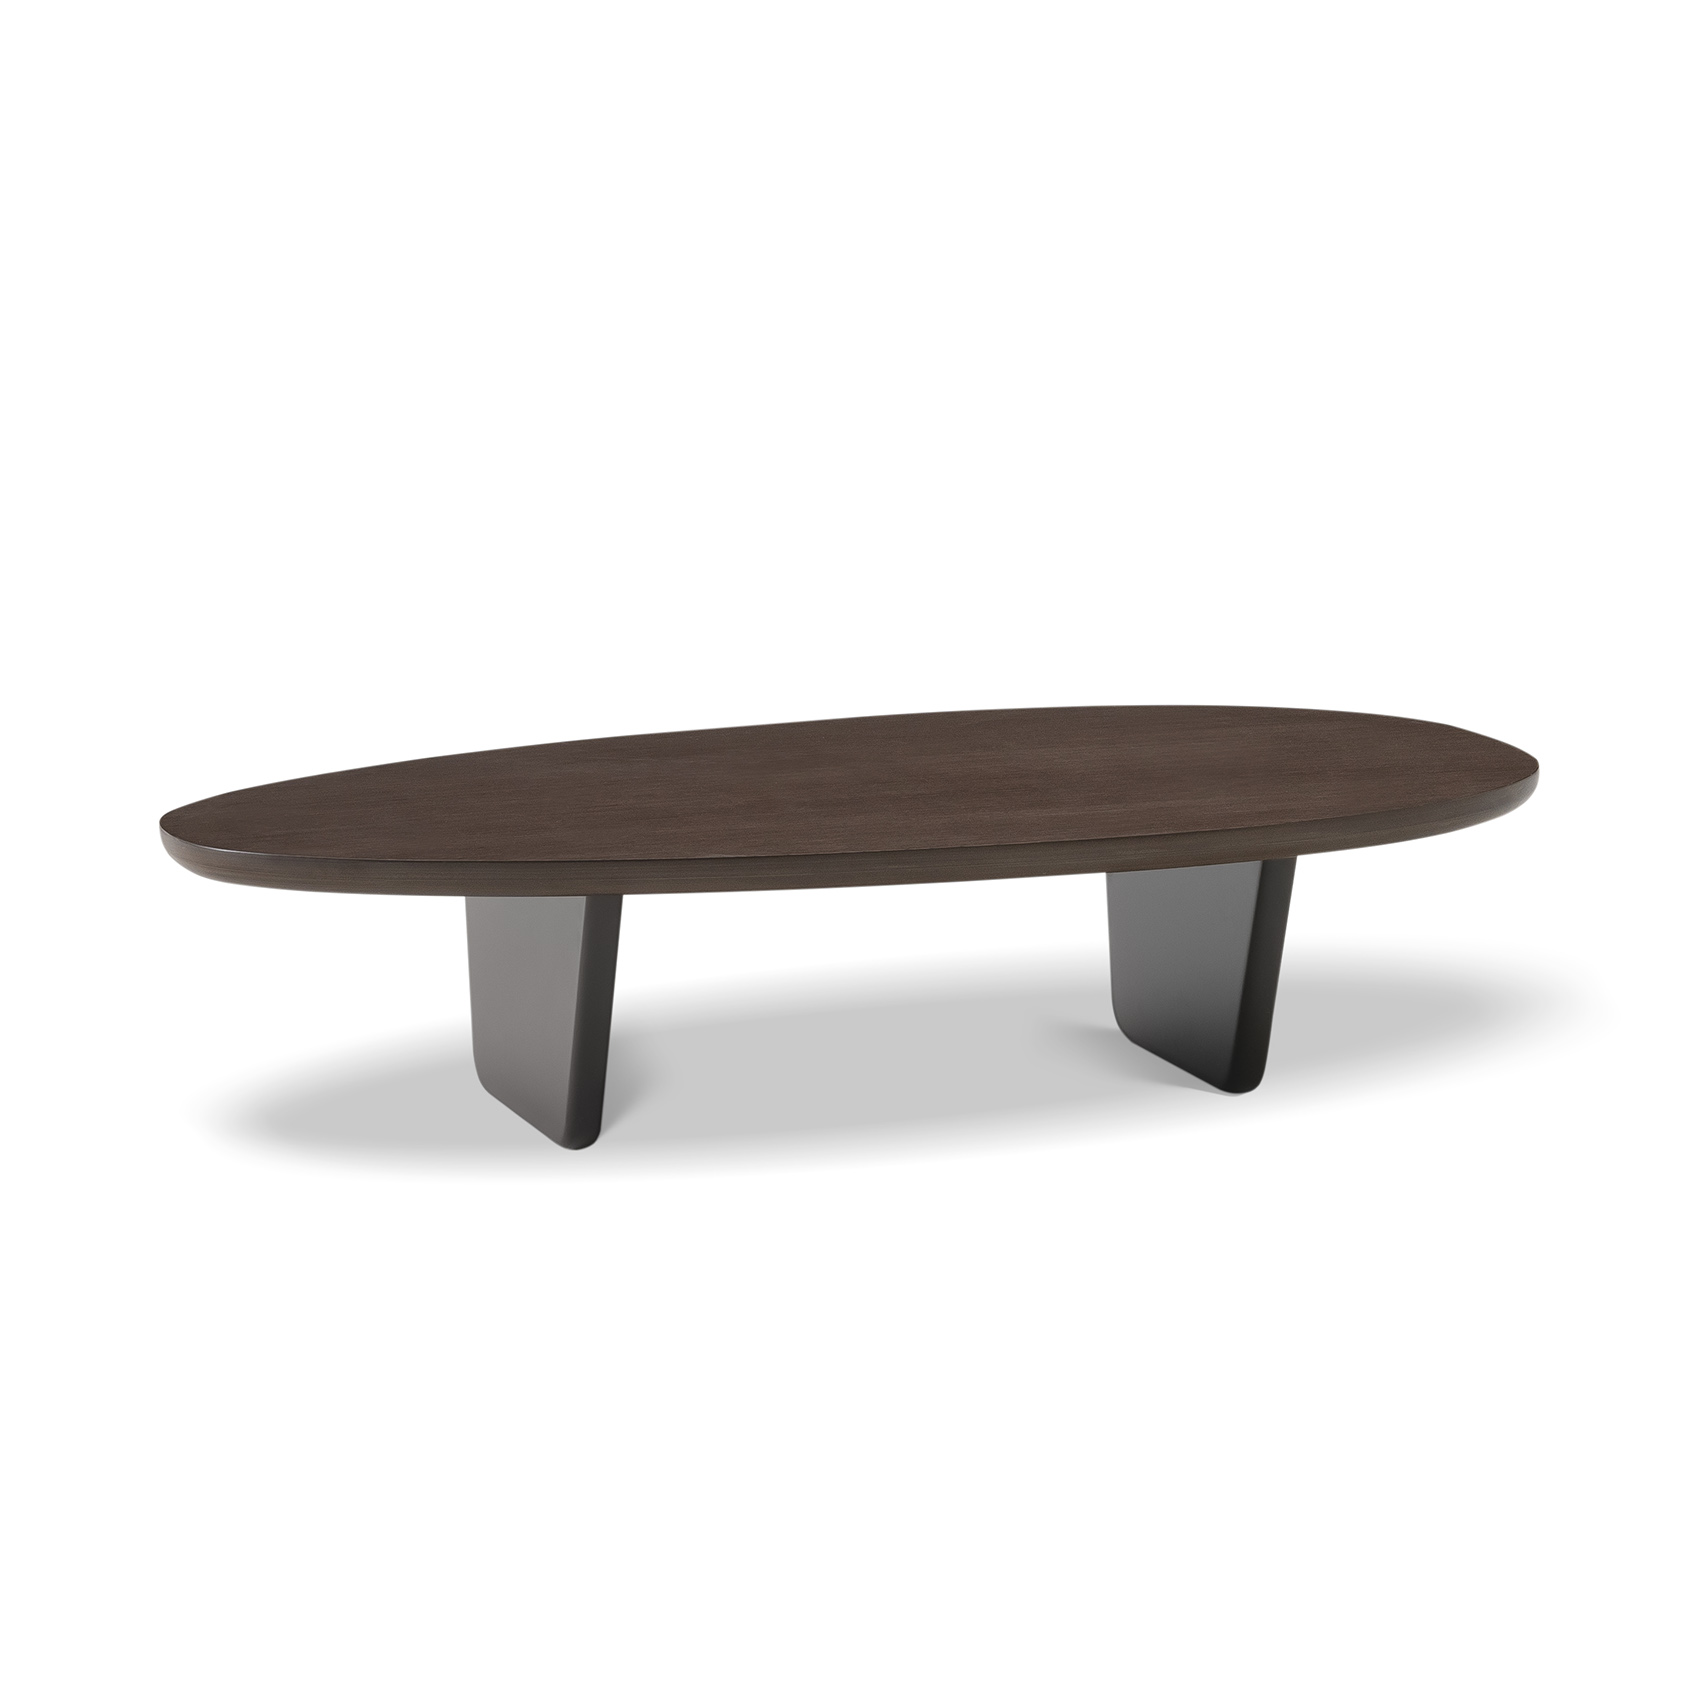 Large Barcelona Coffee Table with gray legs and a special wood color top